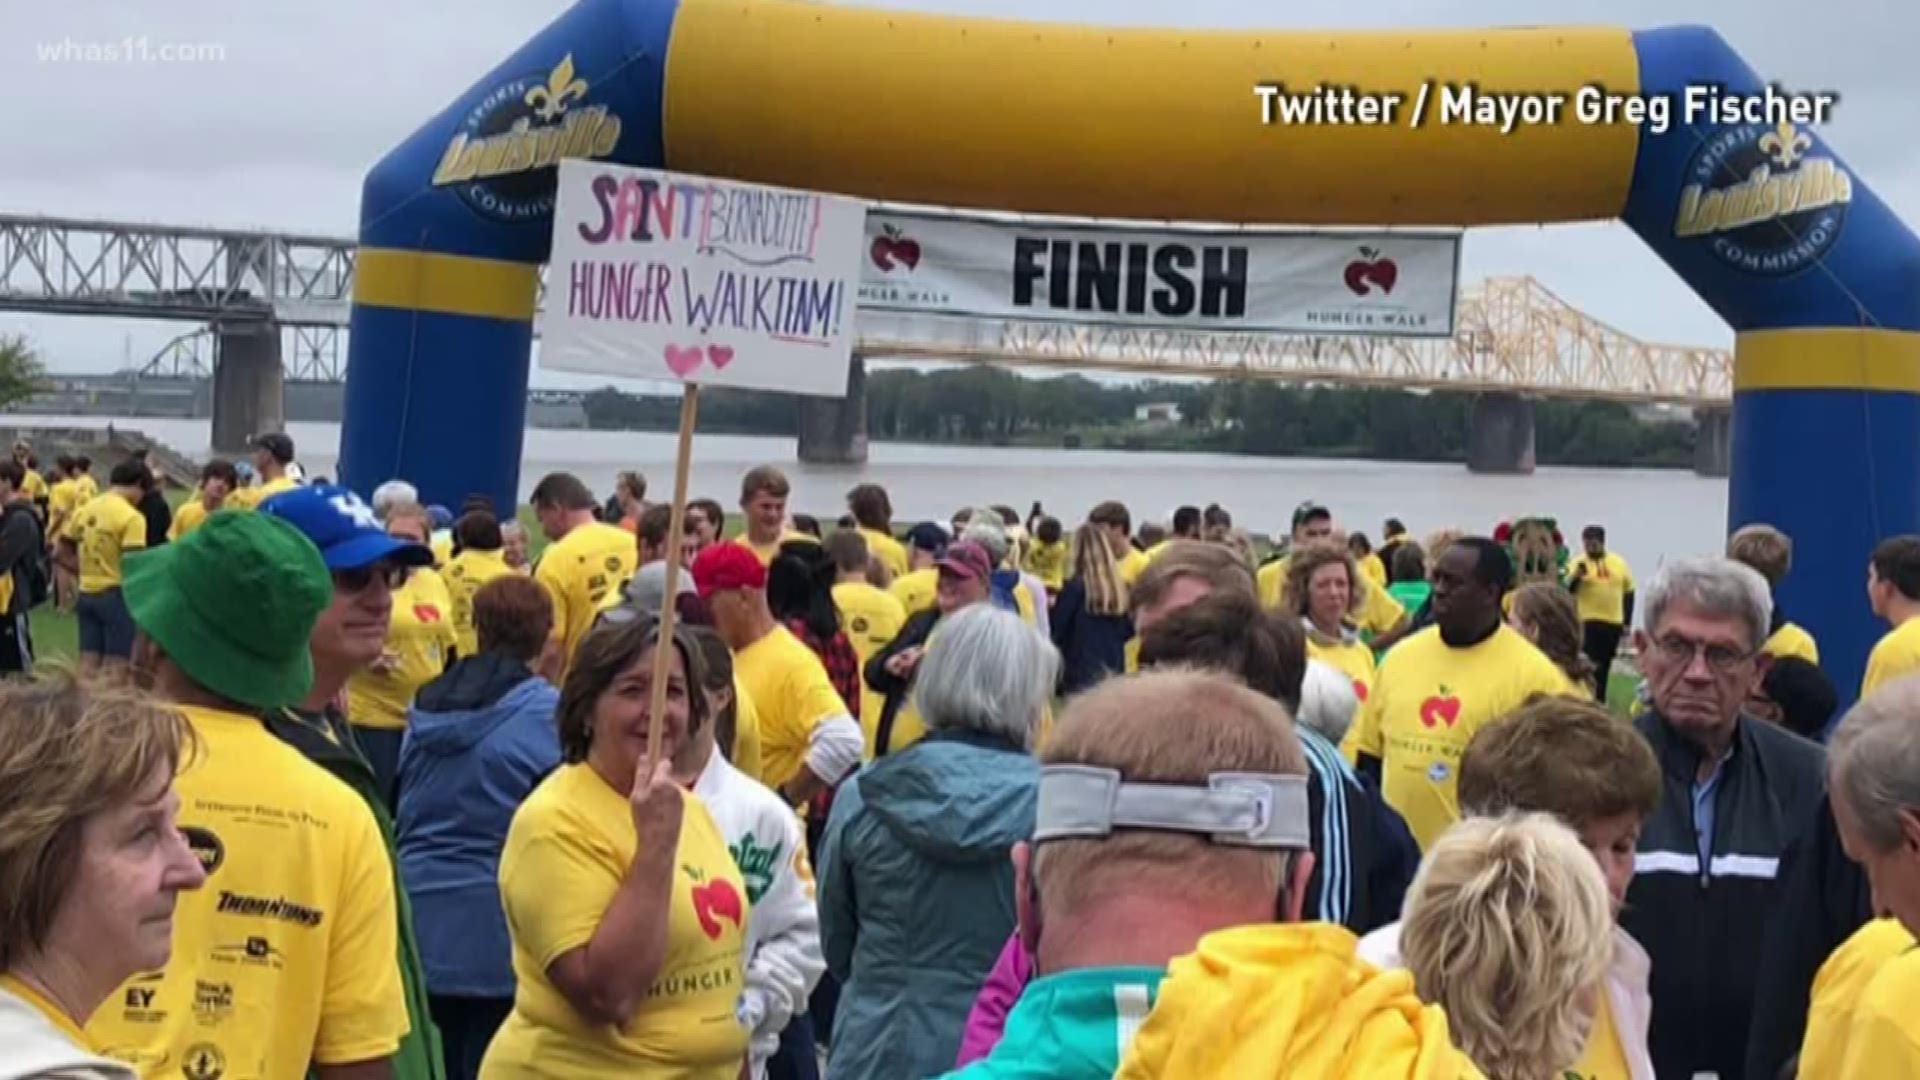 Sunday marked the 40th annual Hunger Walk and family festival held in downtown Louisville. The walk raises money to help combat hunger in Kentuckiana.